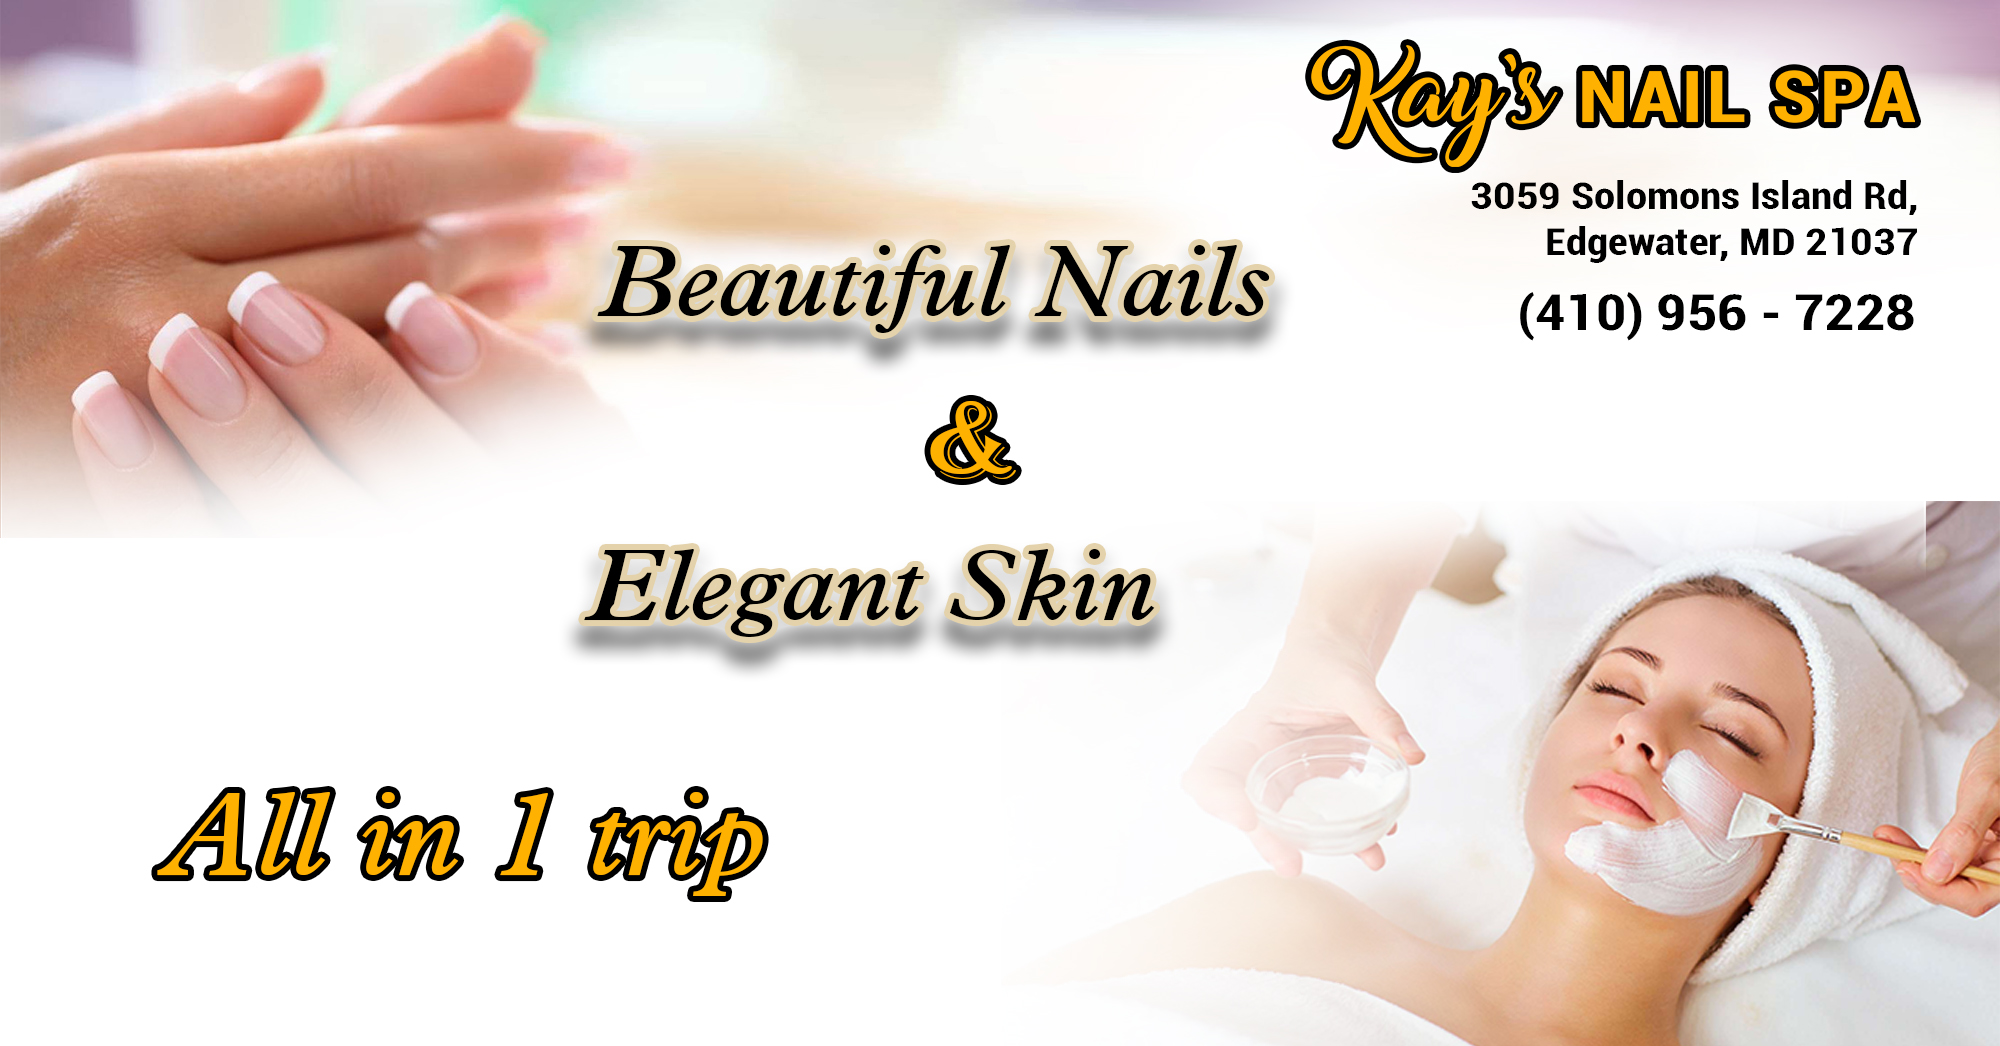 The Best Nails Salon in Edgewater MD